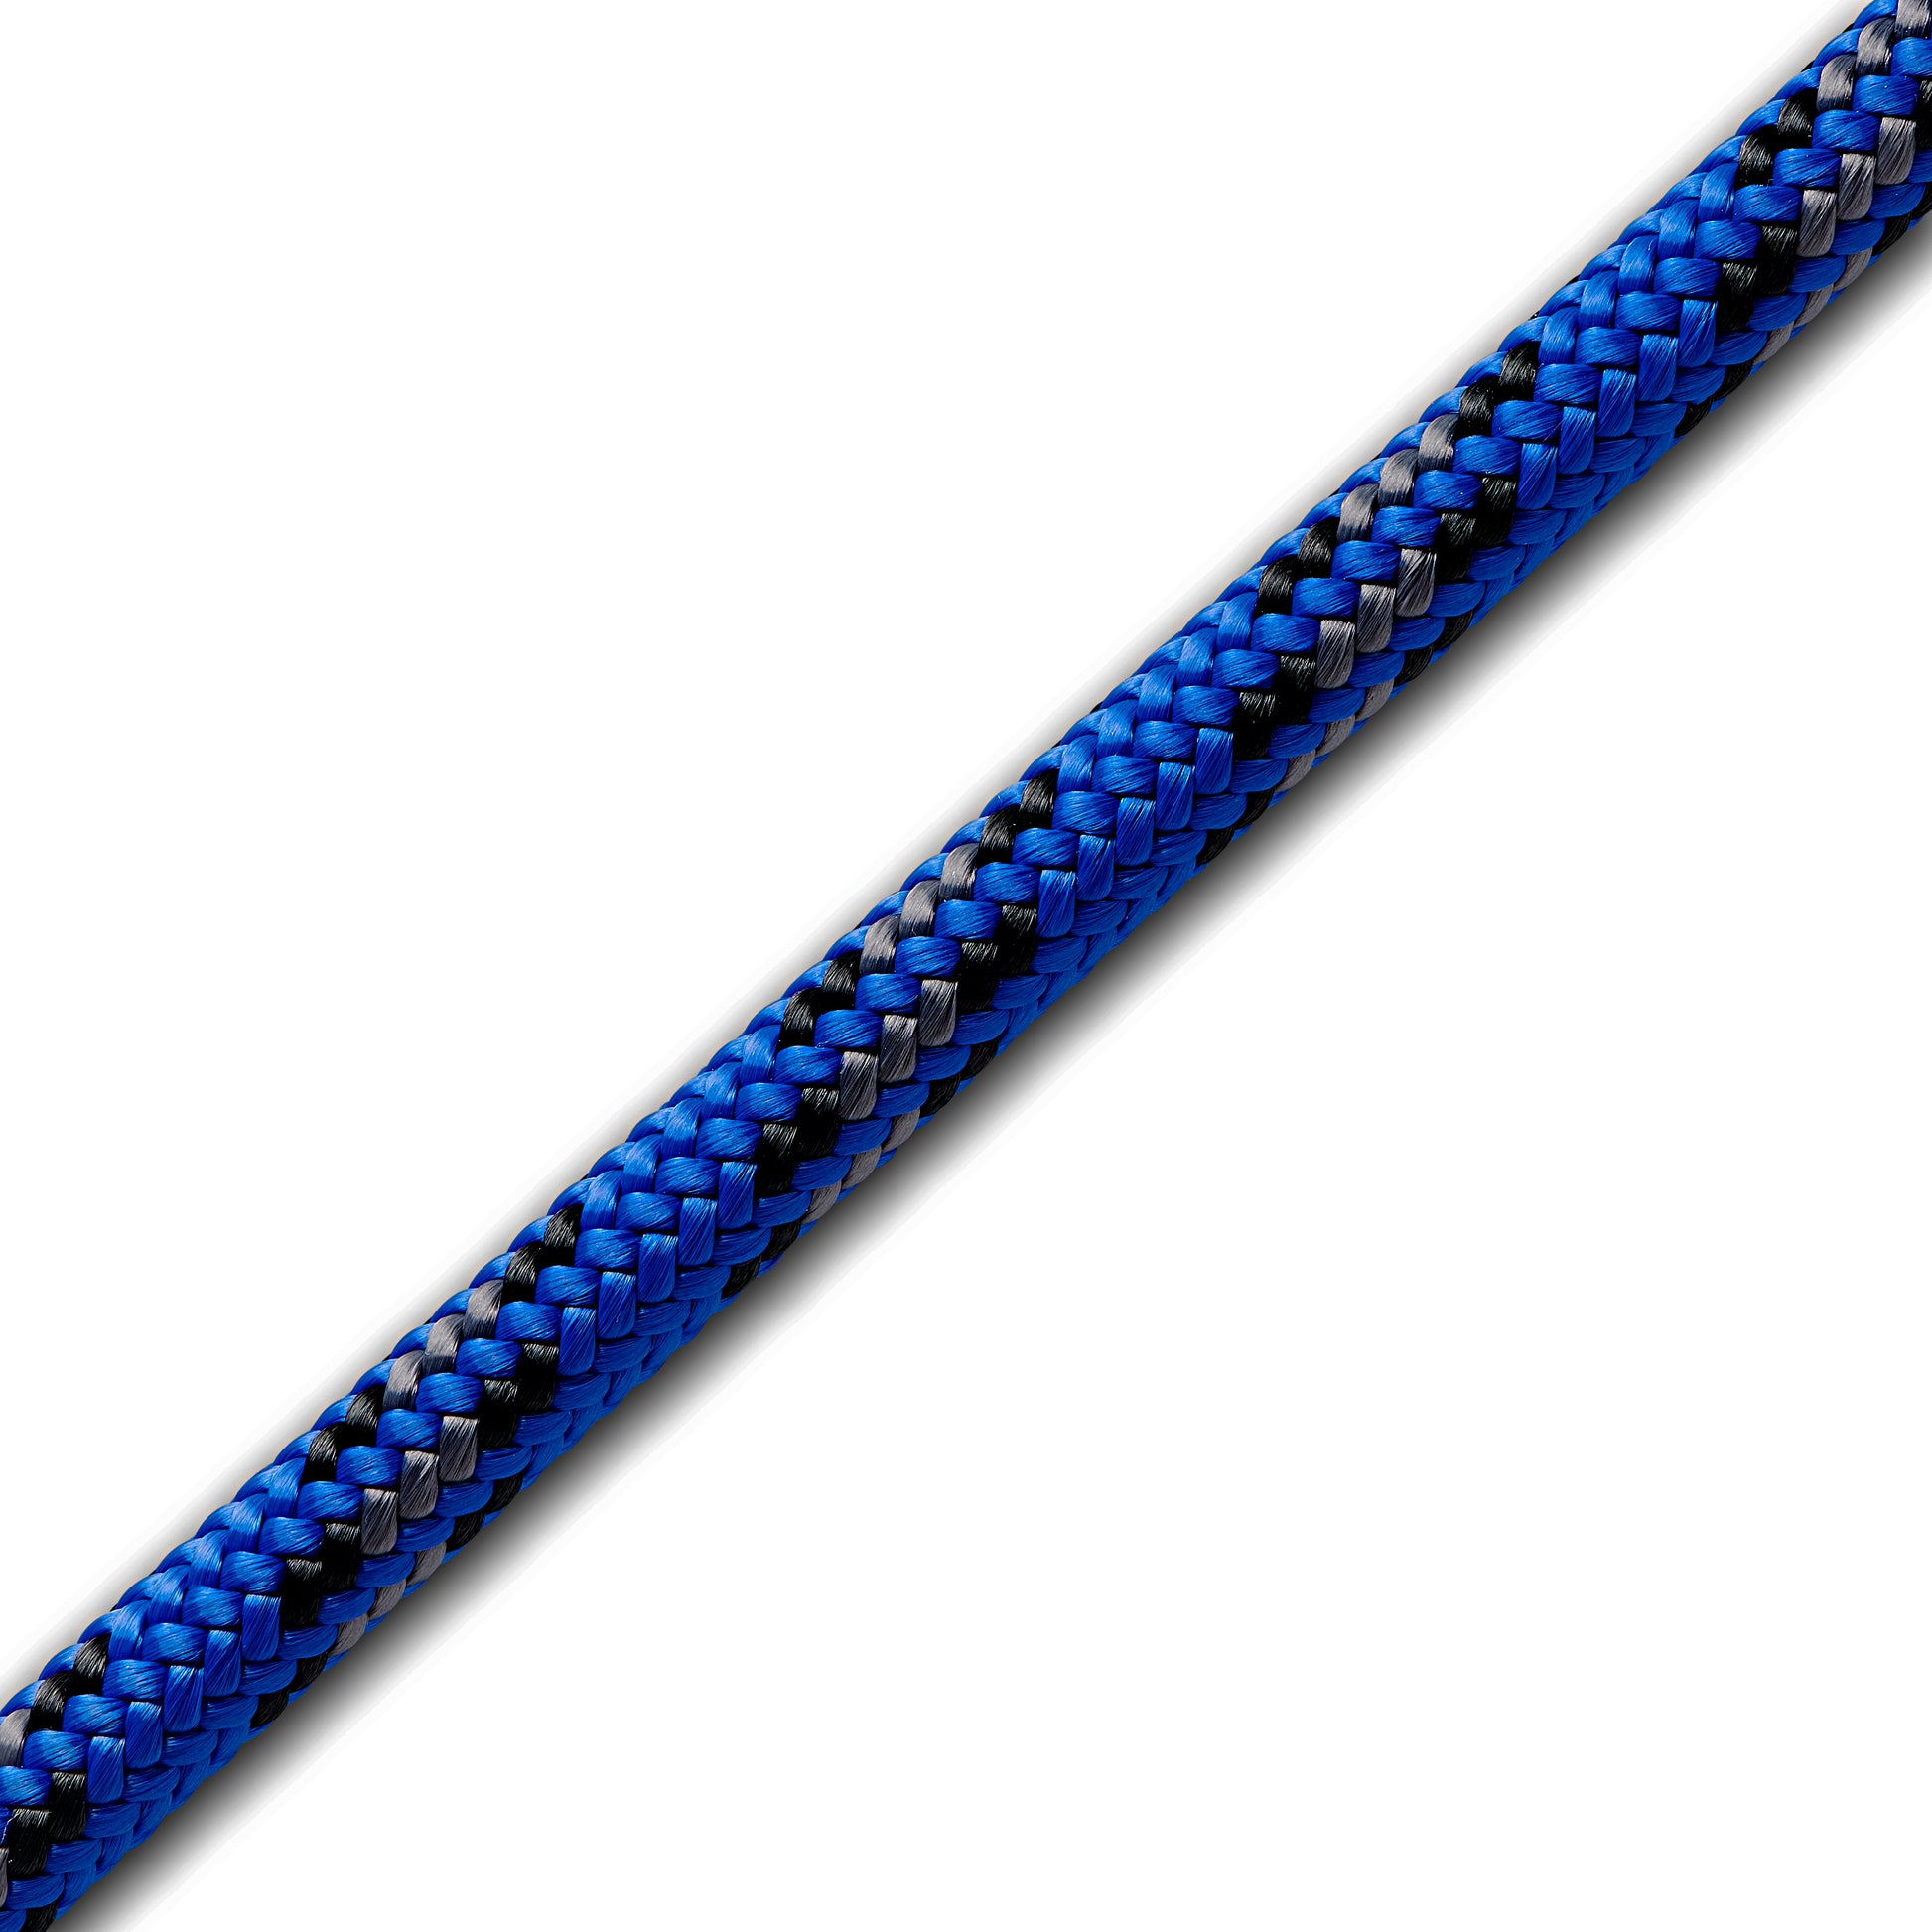 Donaghys Cougar Blue 11.7mm with Splice - LRV8 Rescue